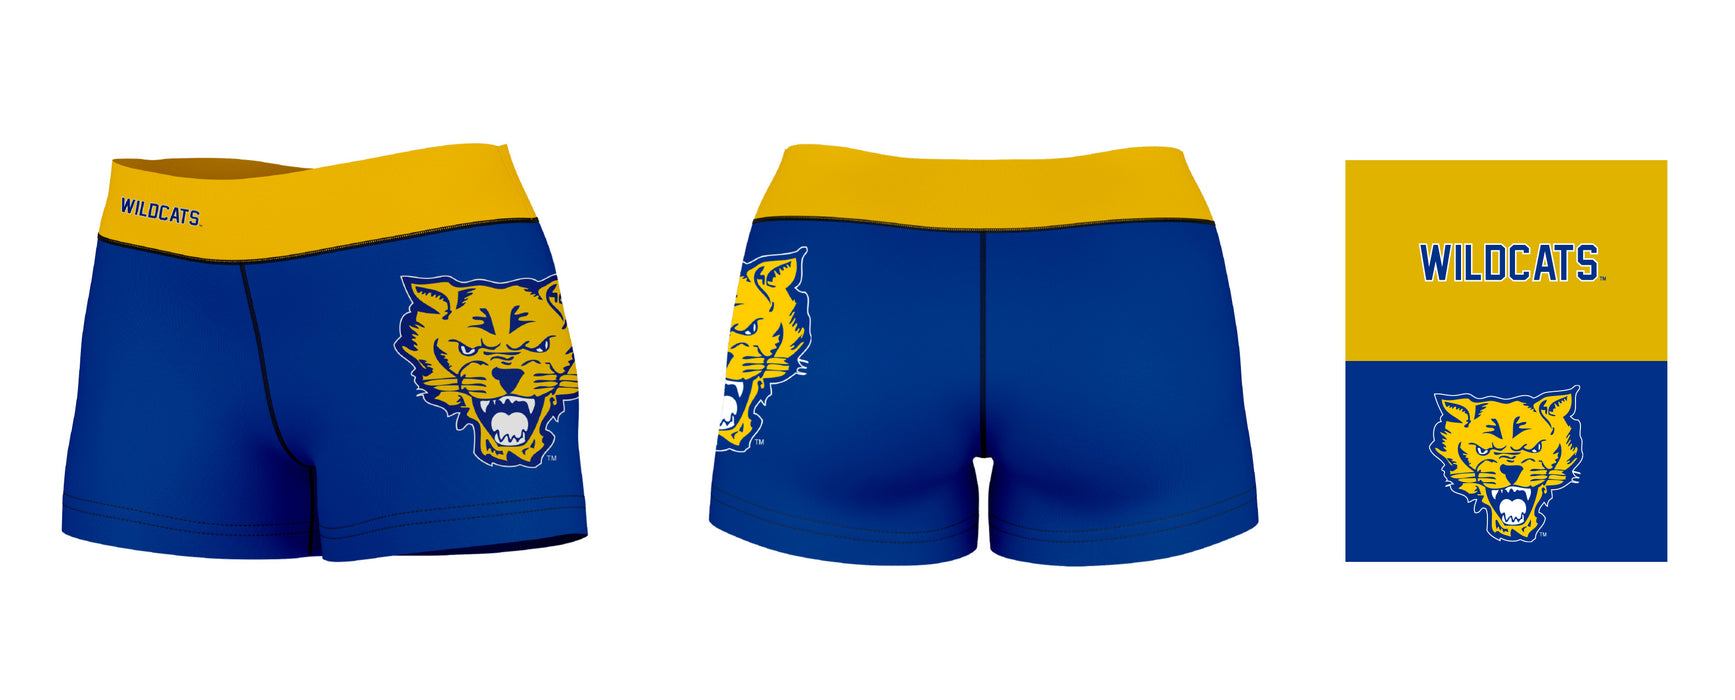 Fort Valley State Wildcats FVSU Logo on Thigh & Waistband  Blue Gold Women Yoga Booty Workout Shorts 3.75 Inseam - Vive La Fête - Online Apparel Store